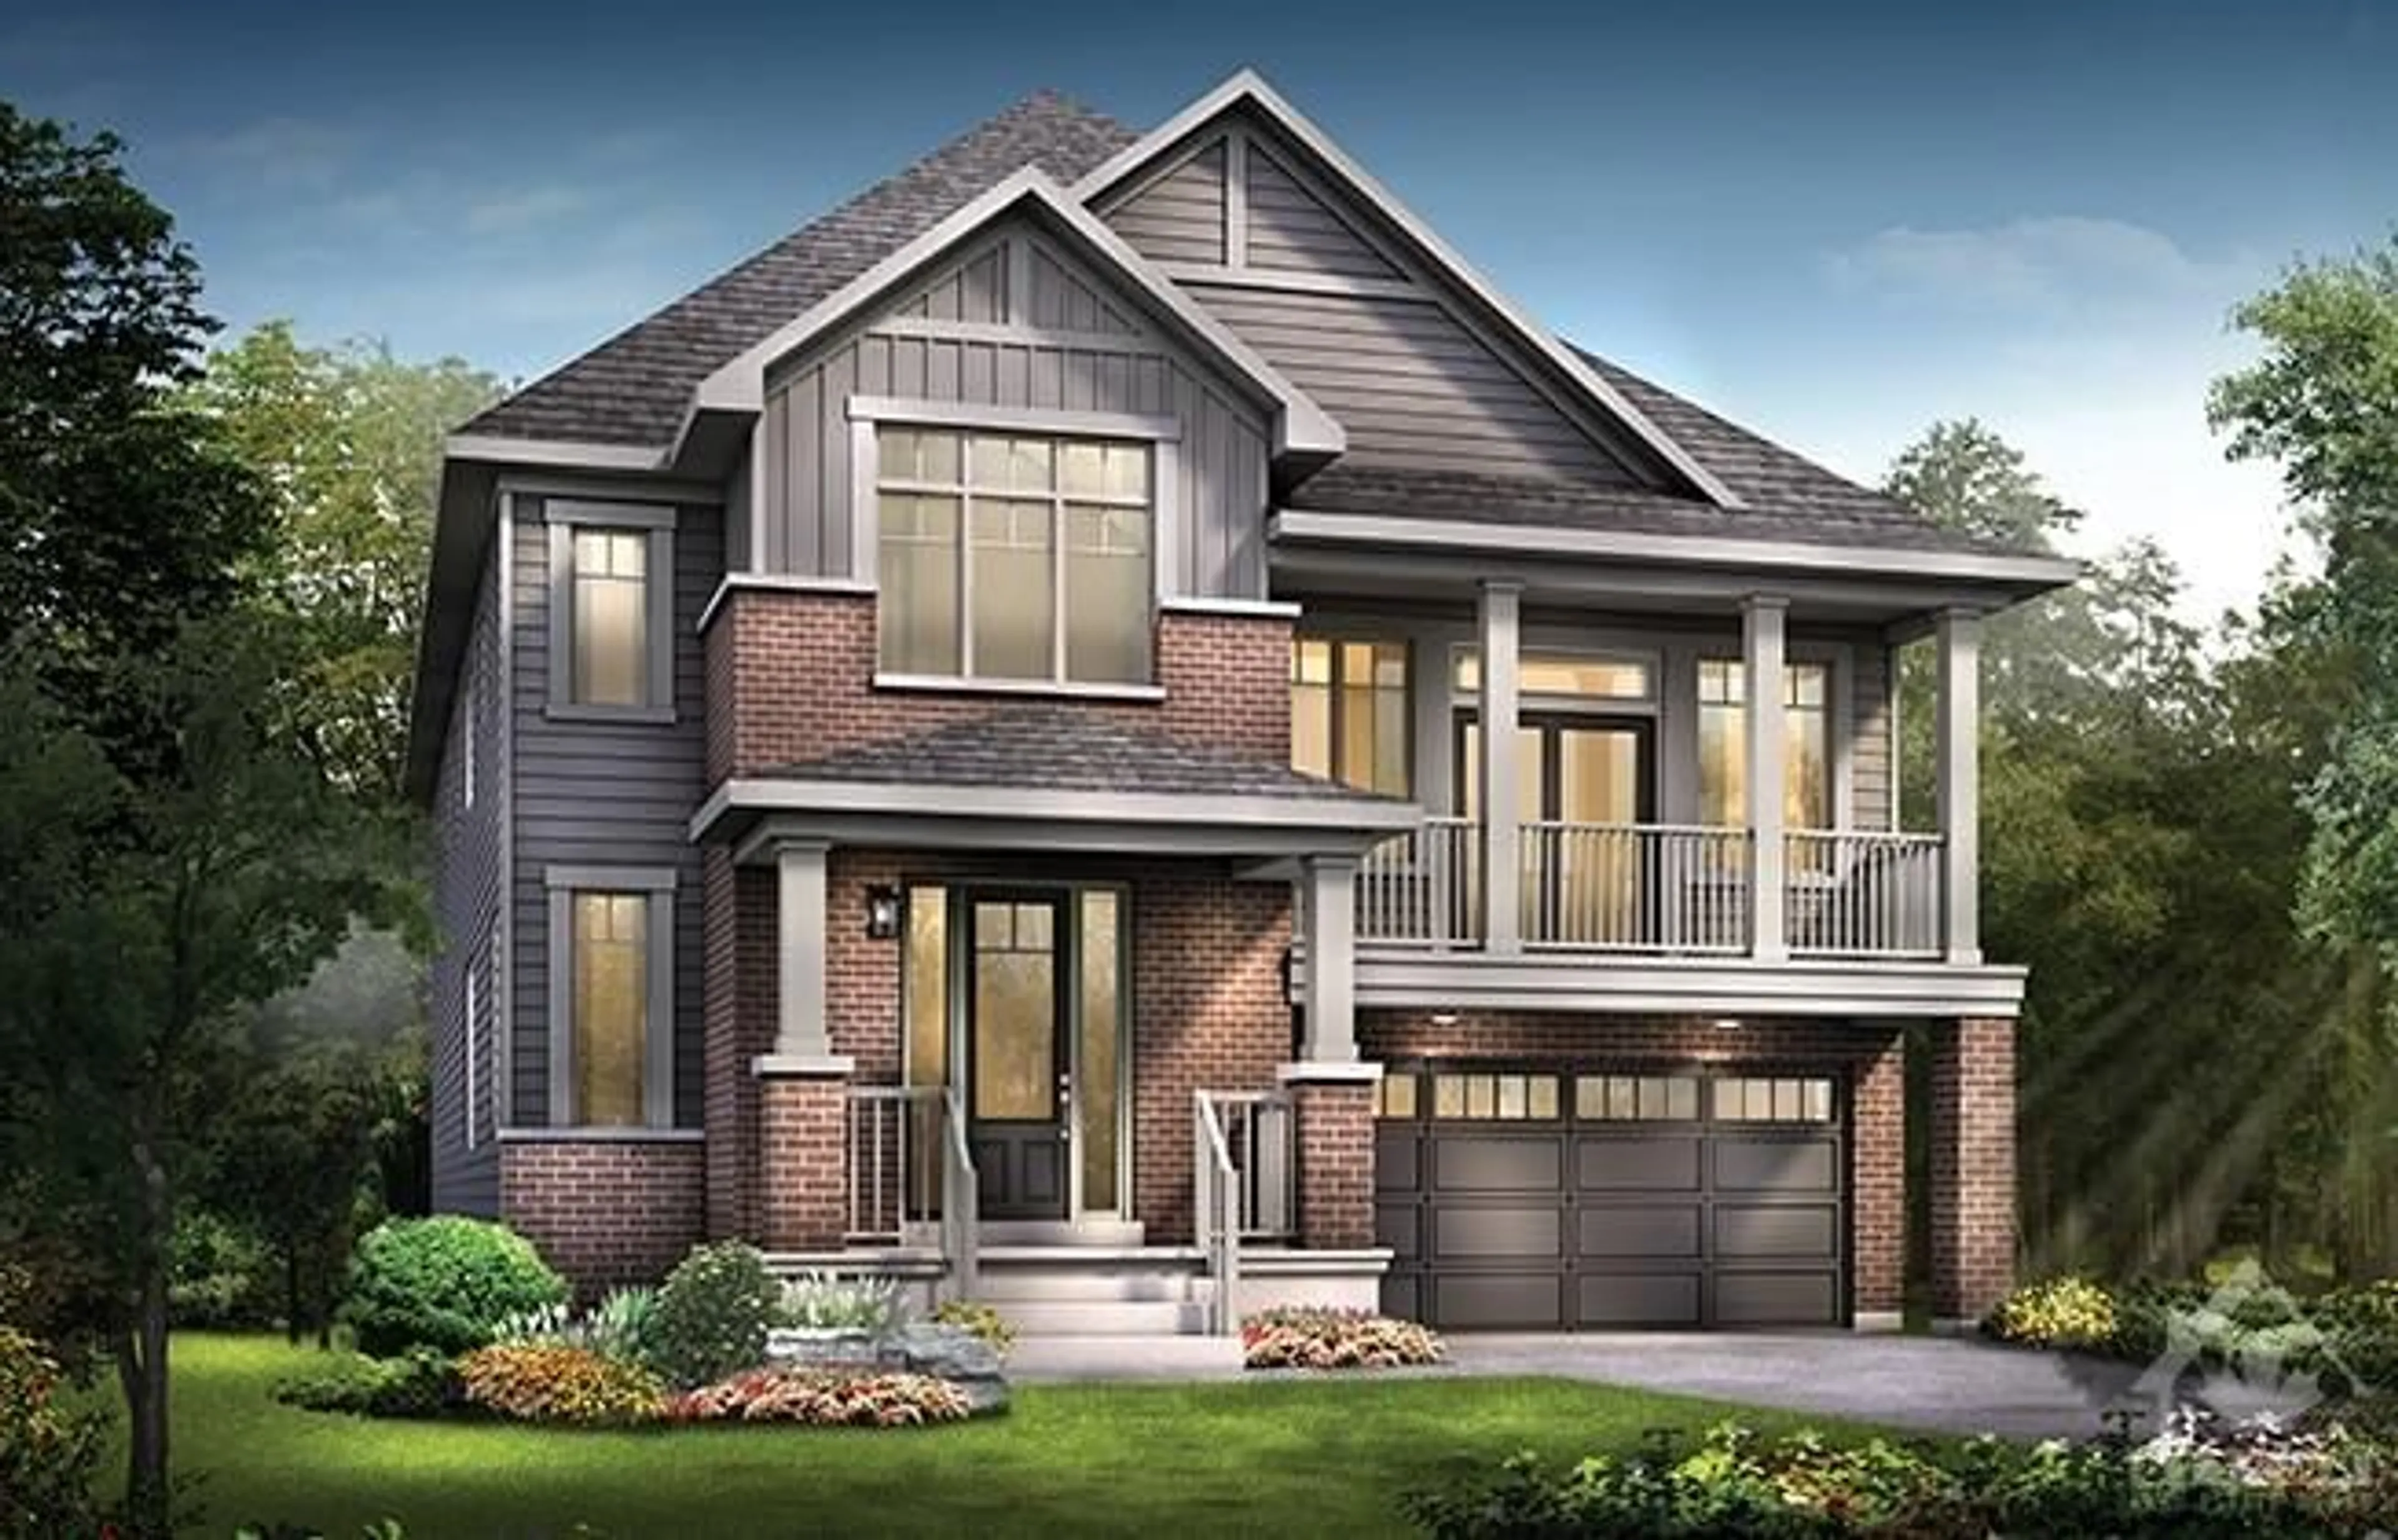 Home with brick exterior material for 626 INVER Lane, Ottawa Ontario K2J 7C4